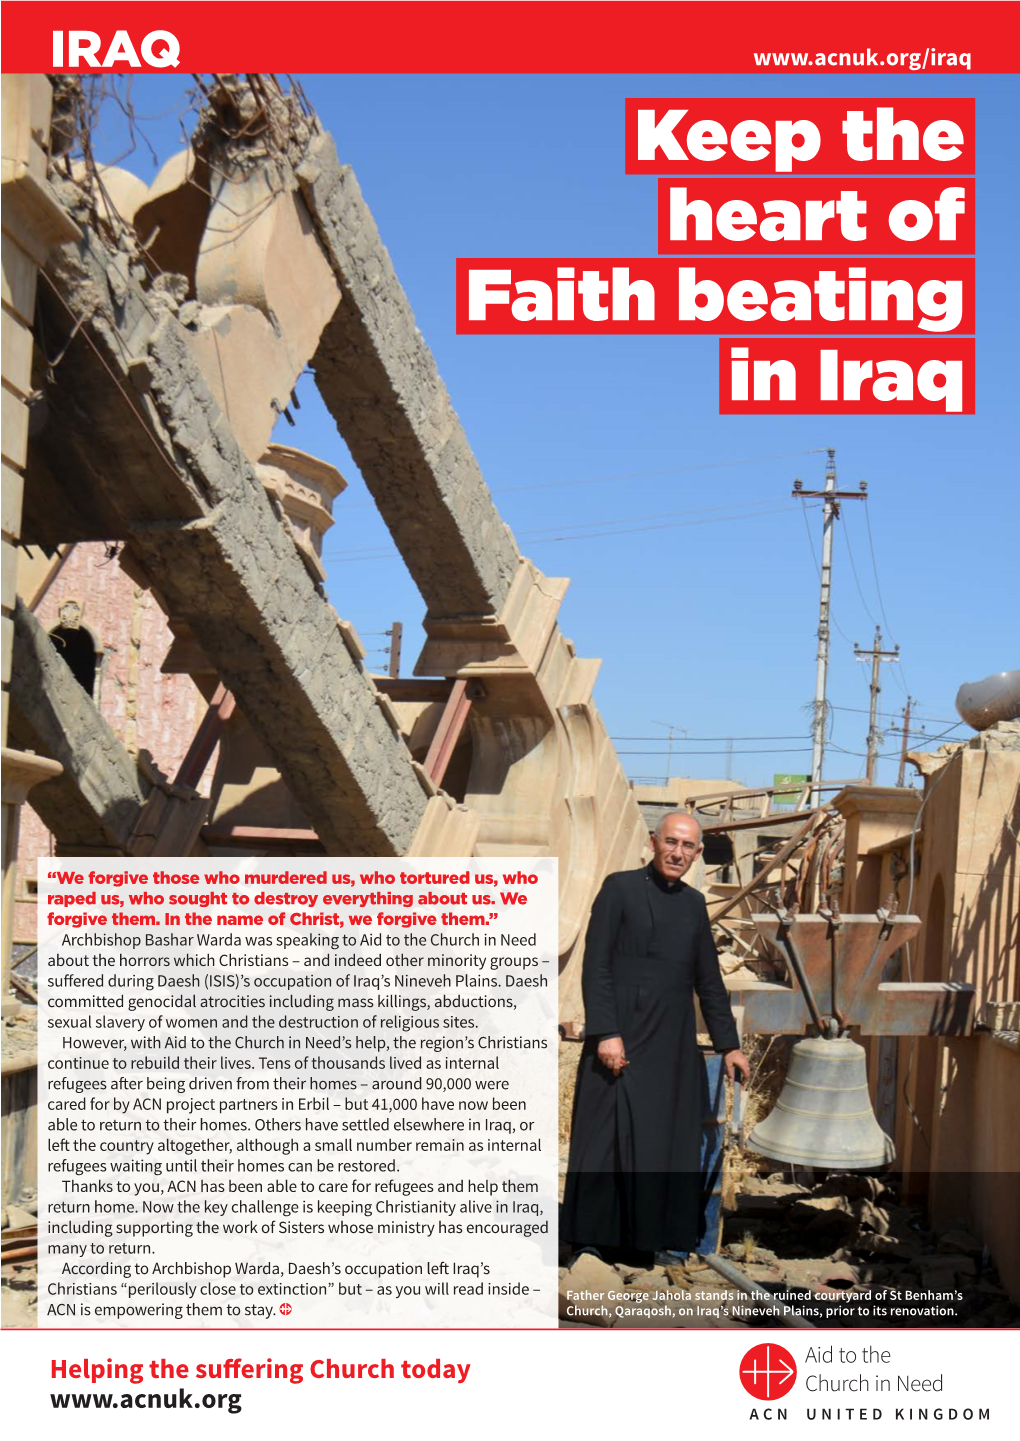 Keep the Heart of Faith Beating in Iraq